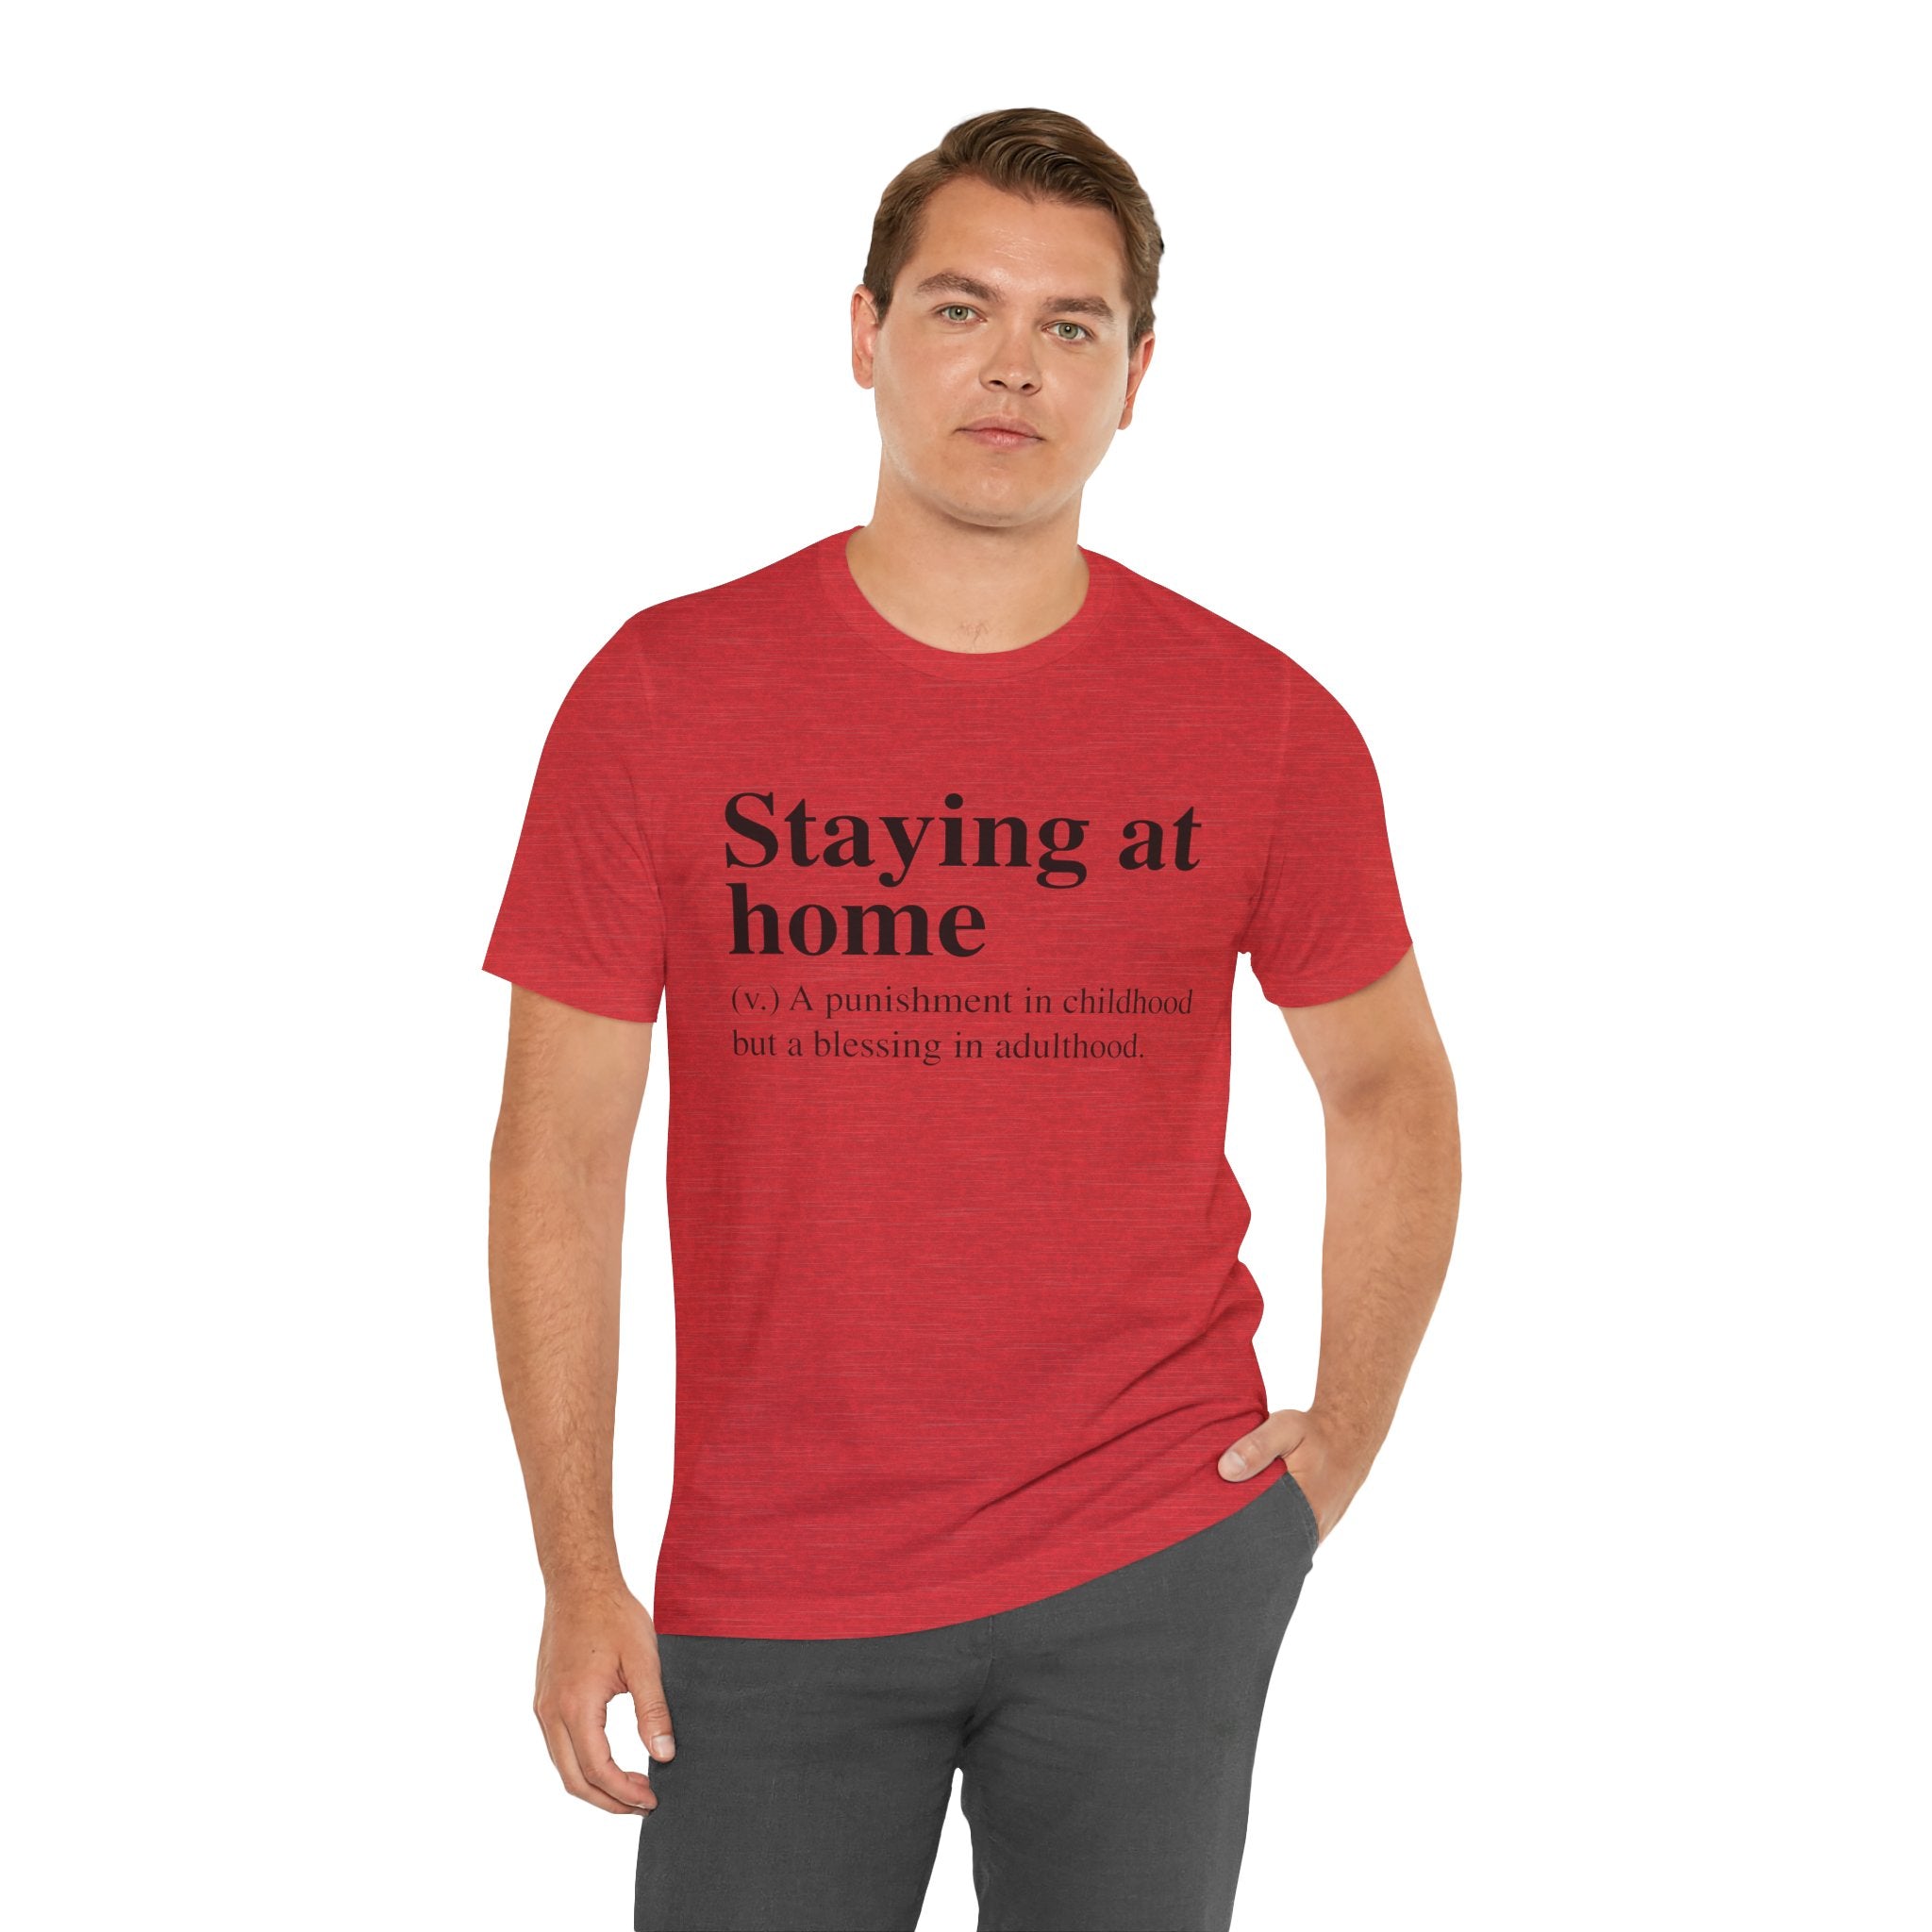 Man in a red Staying at Home T-Shirt with text "staying home - (n) a punishment in childhood but a blessing in adulthood" standing with one hand on his hip.